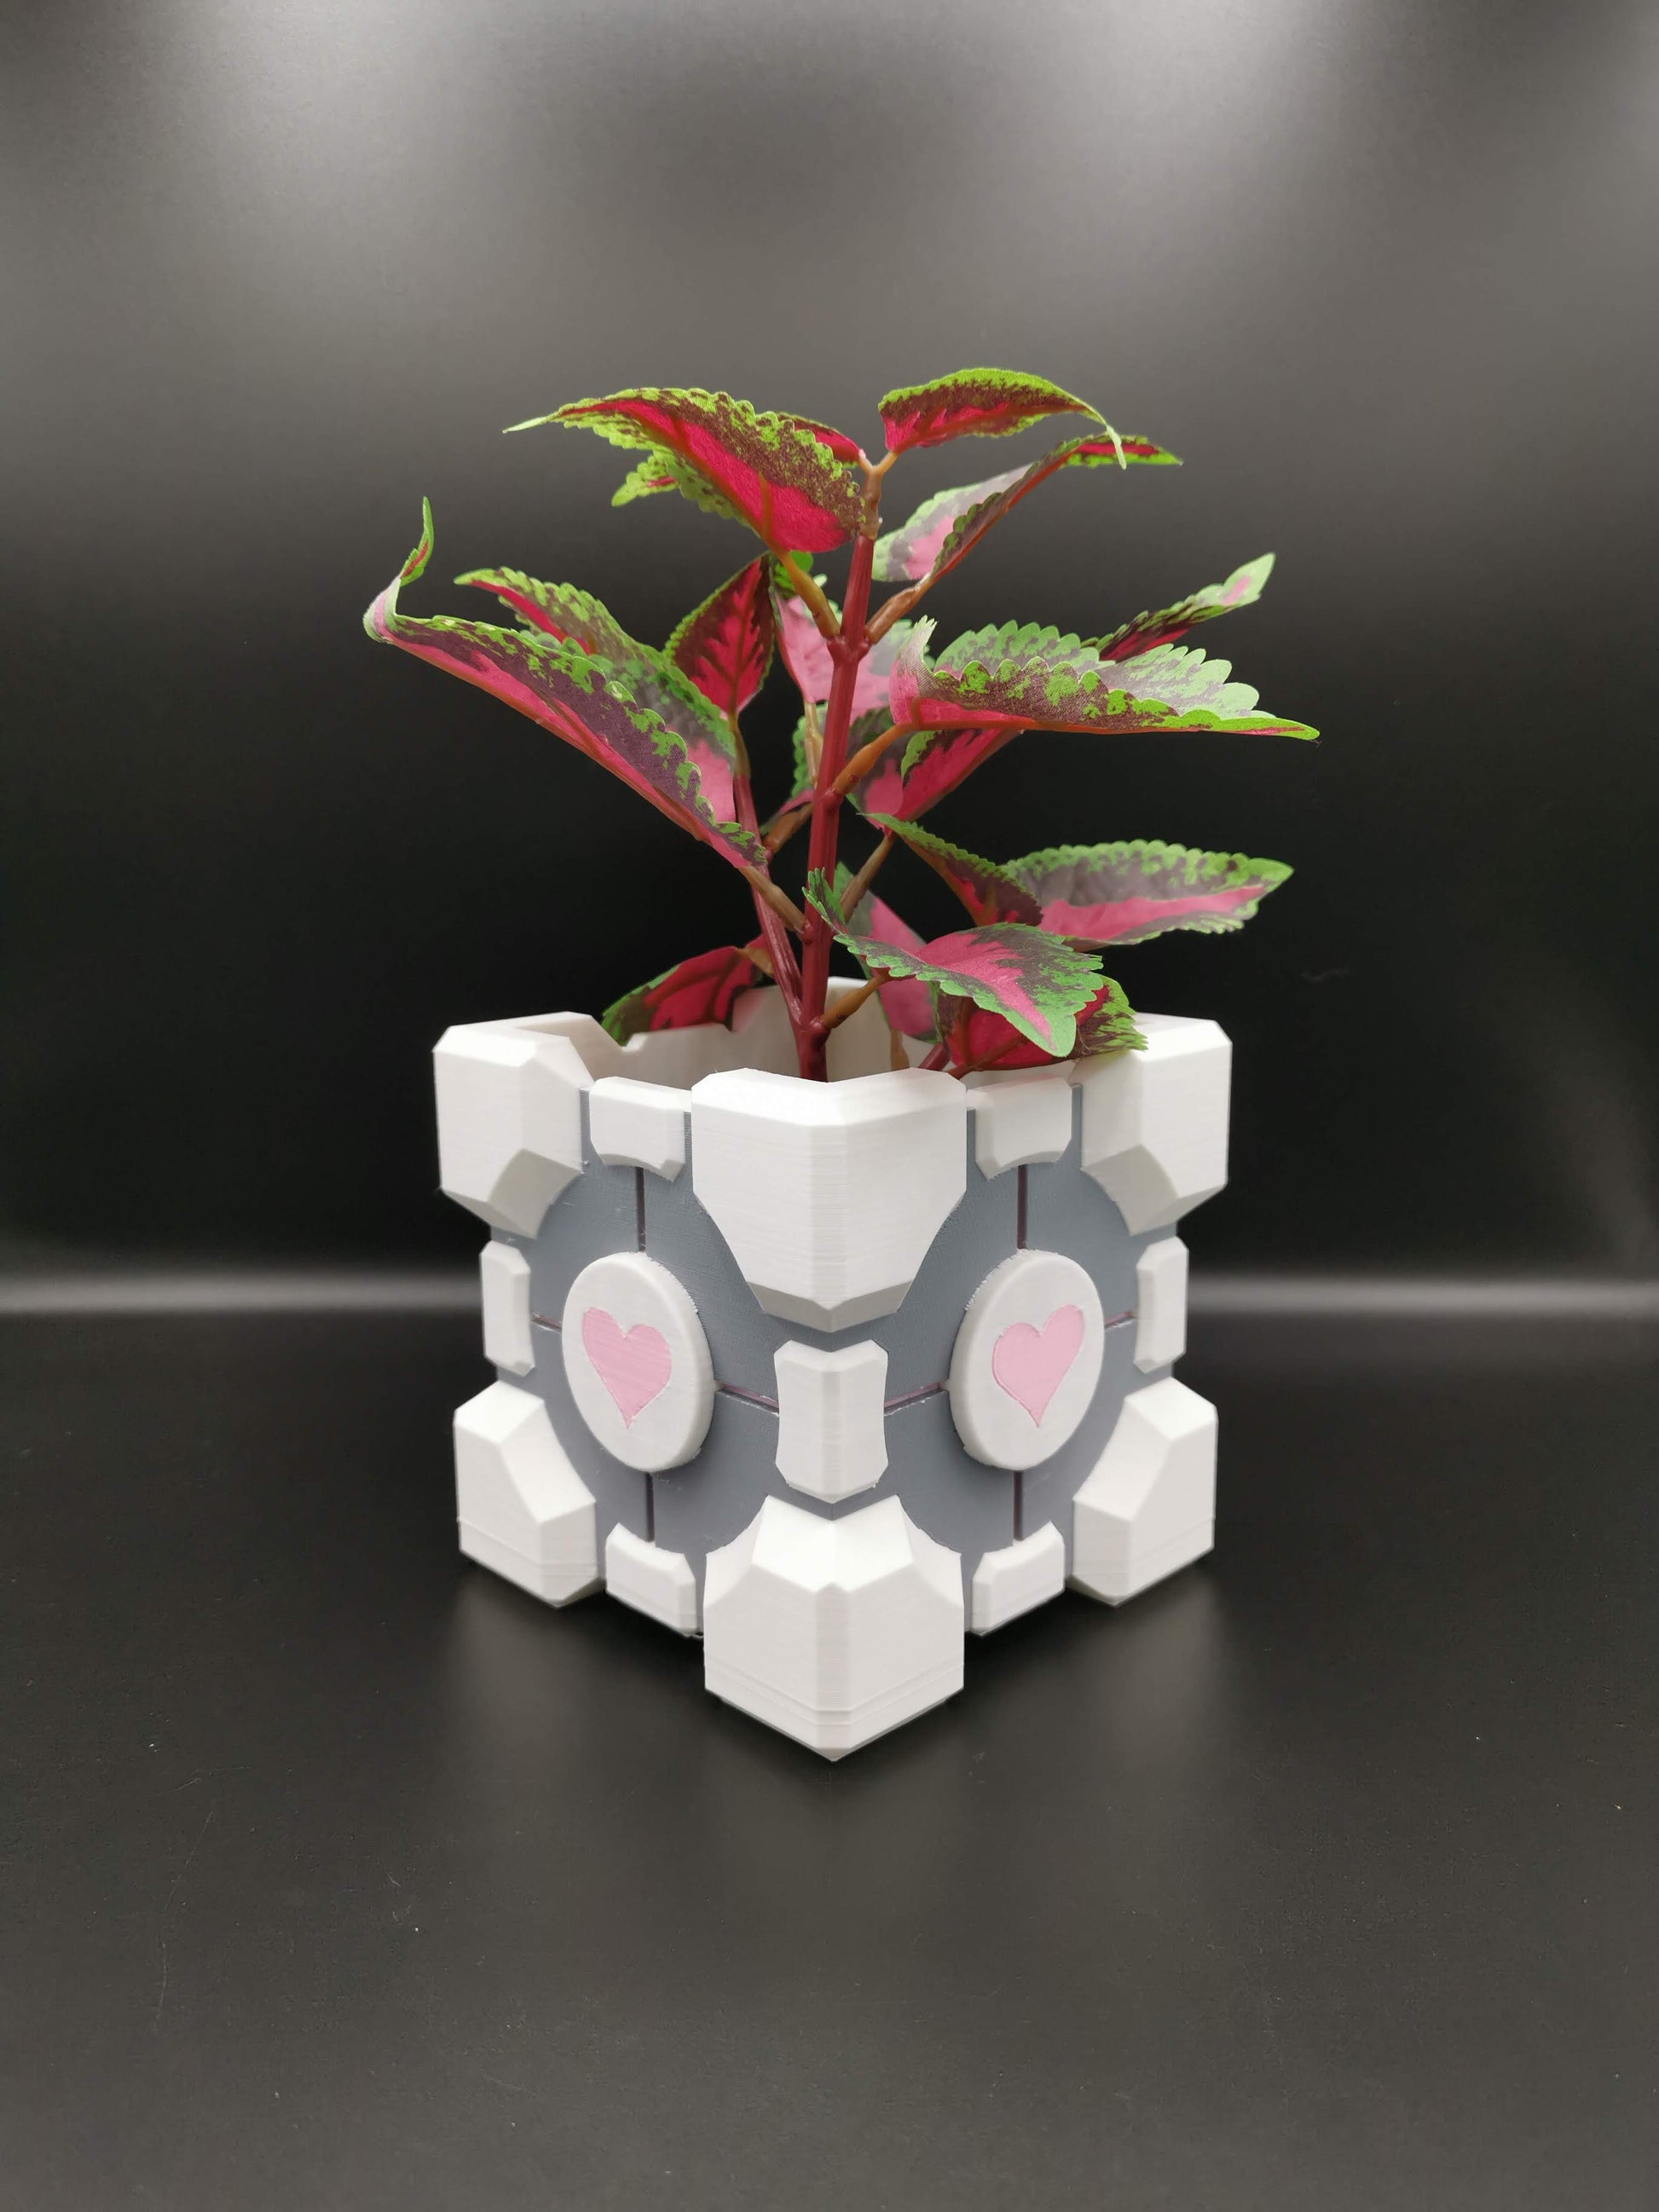 Companion Cube Portal planter from front angle close up with plant